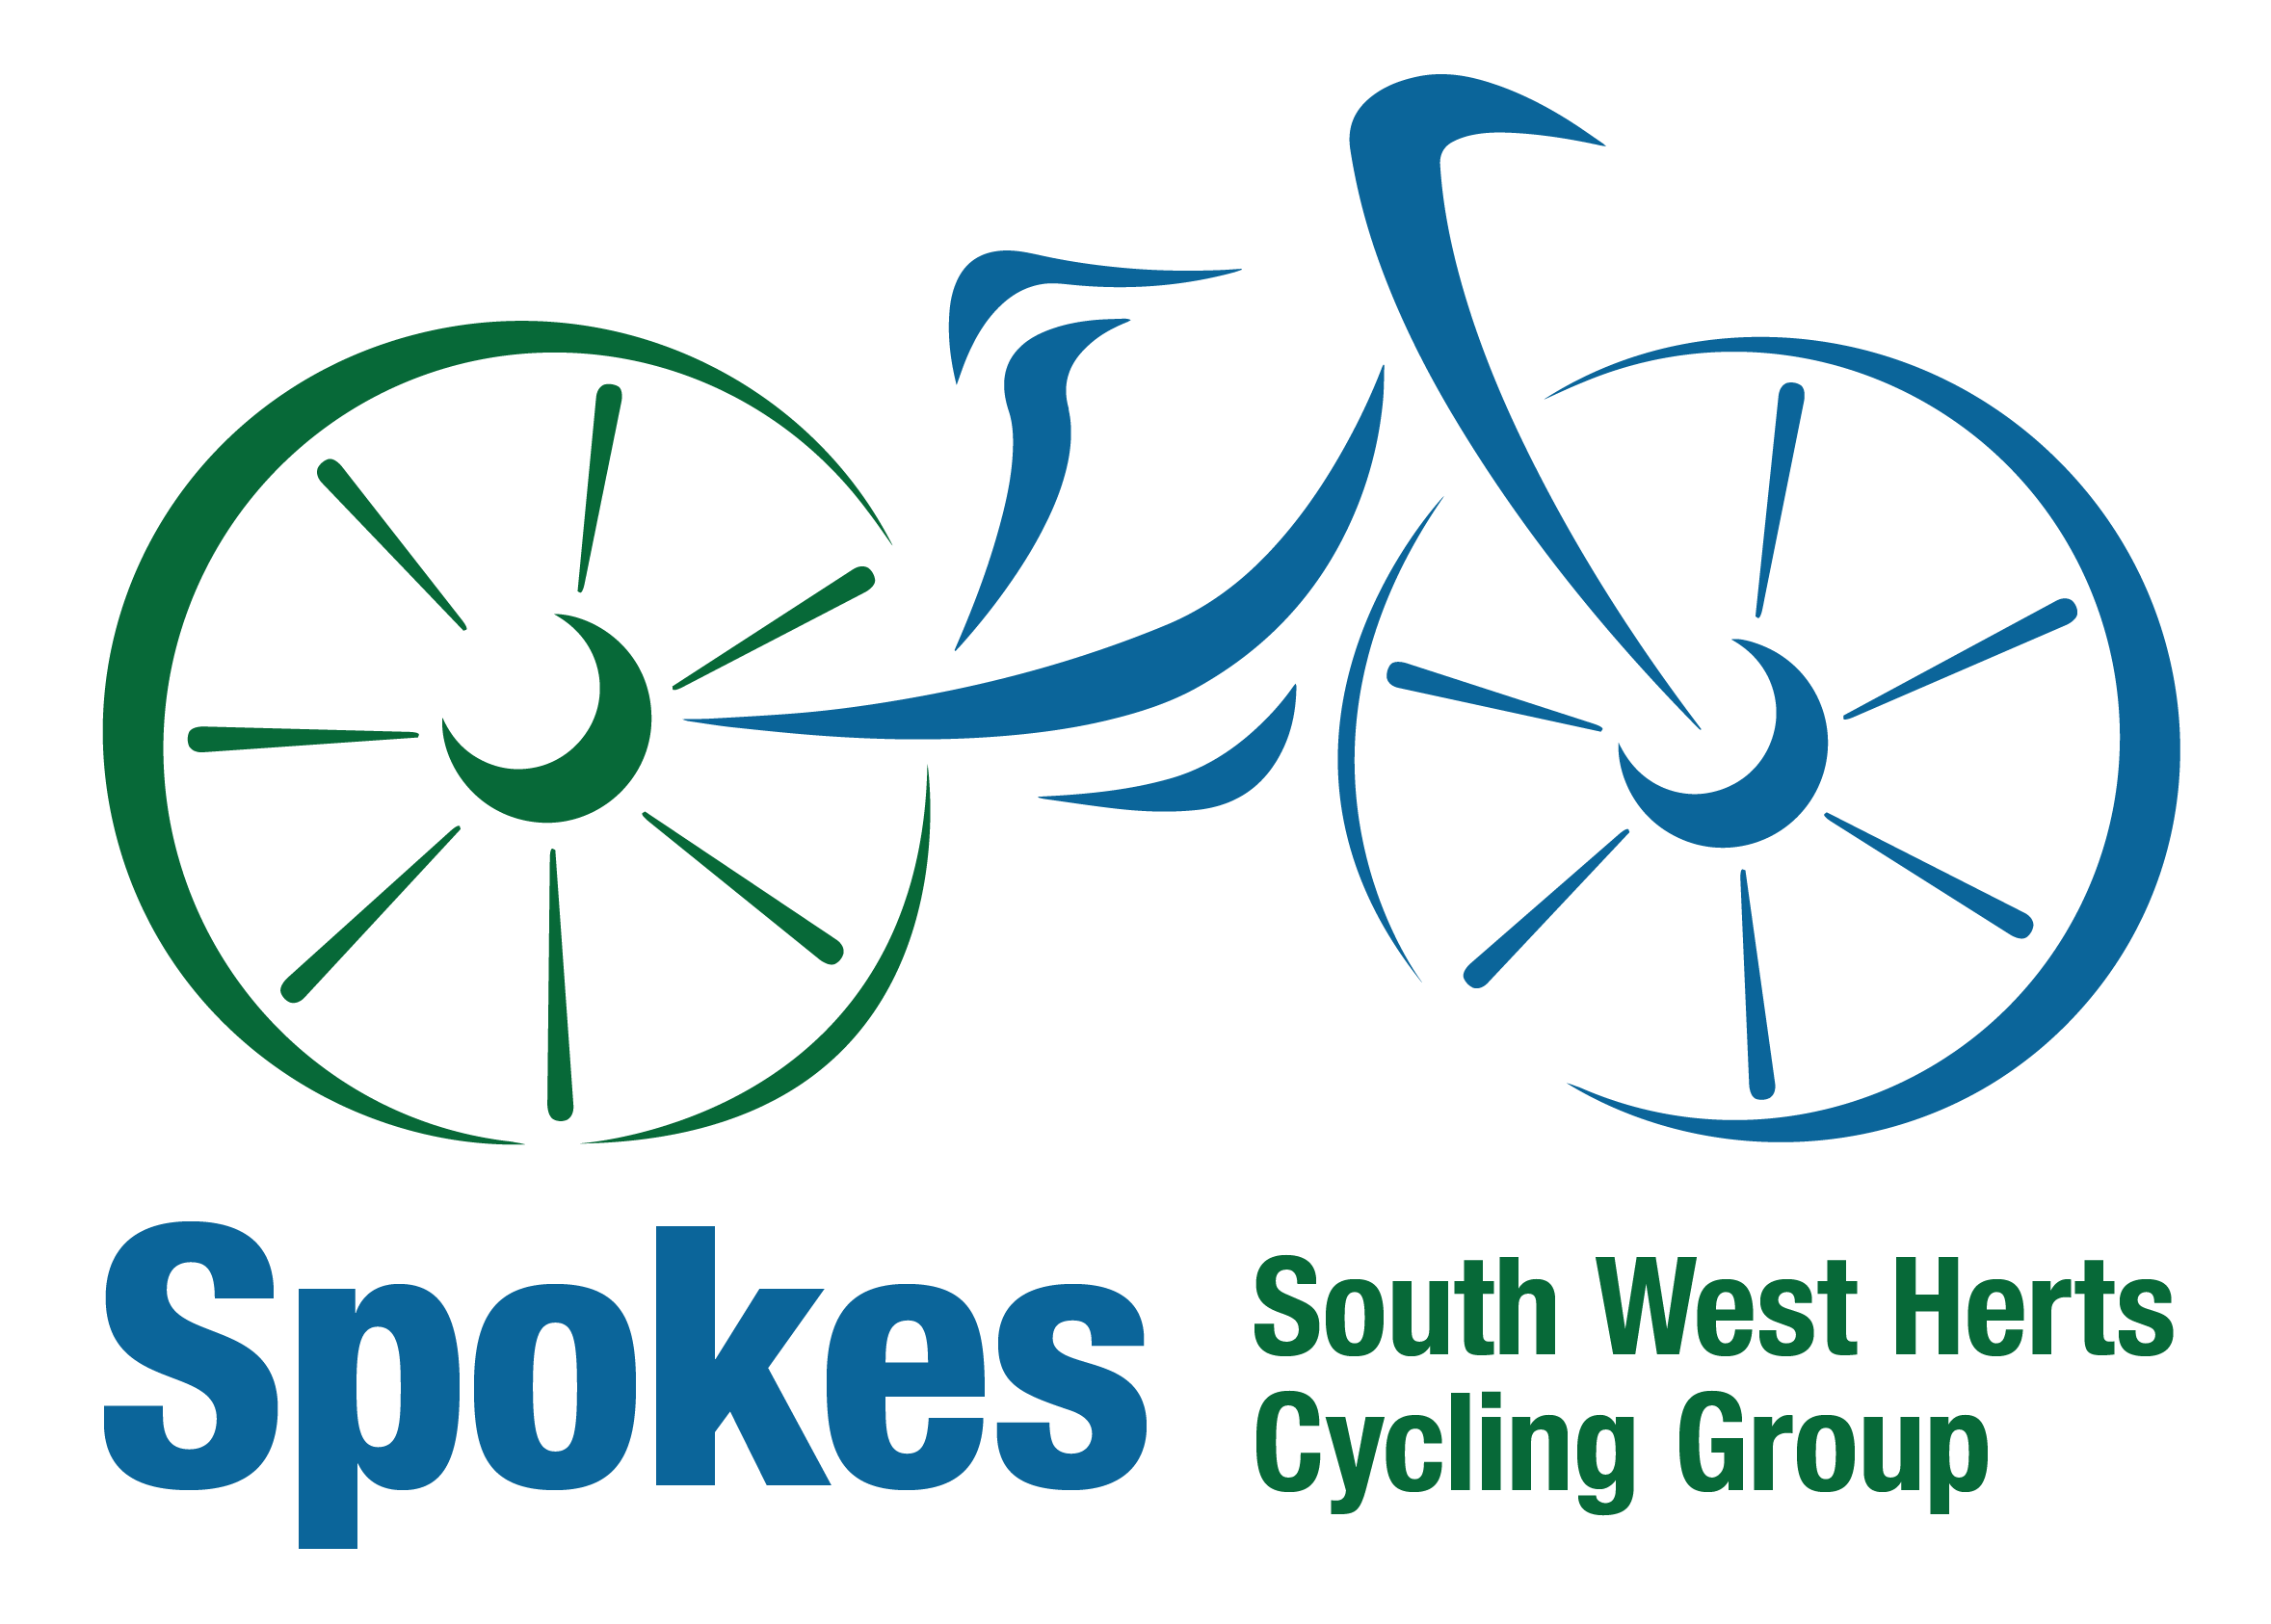 Spokes South West Herts Cycling Group